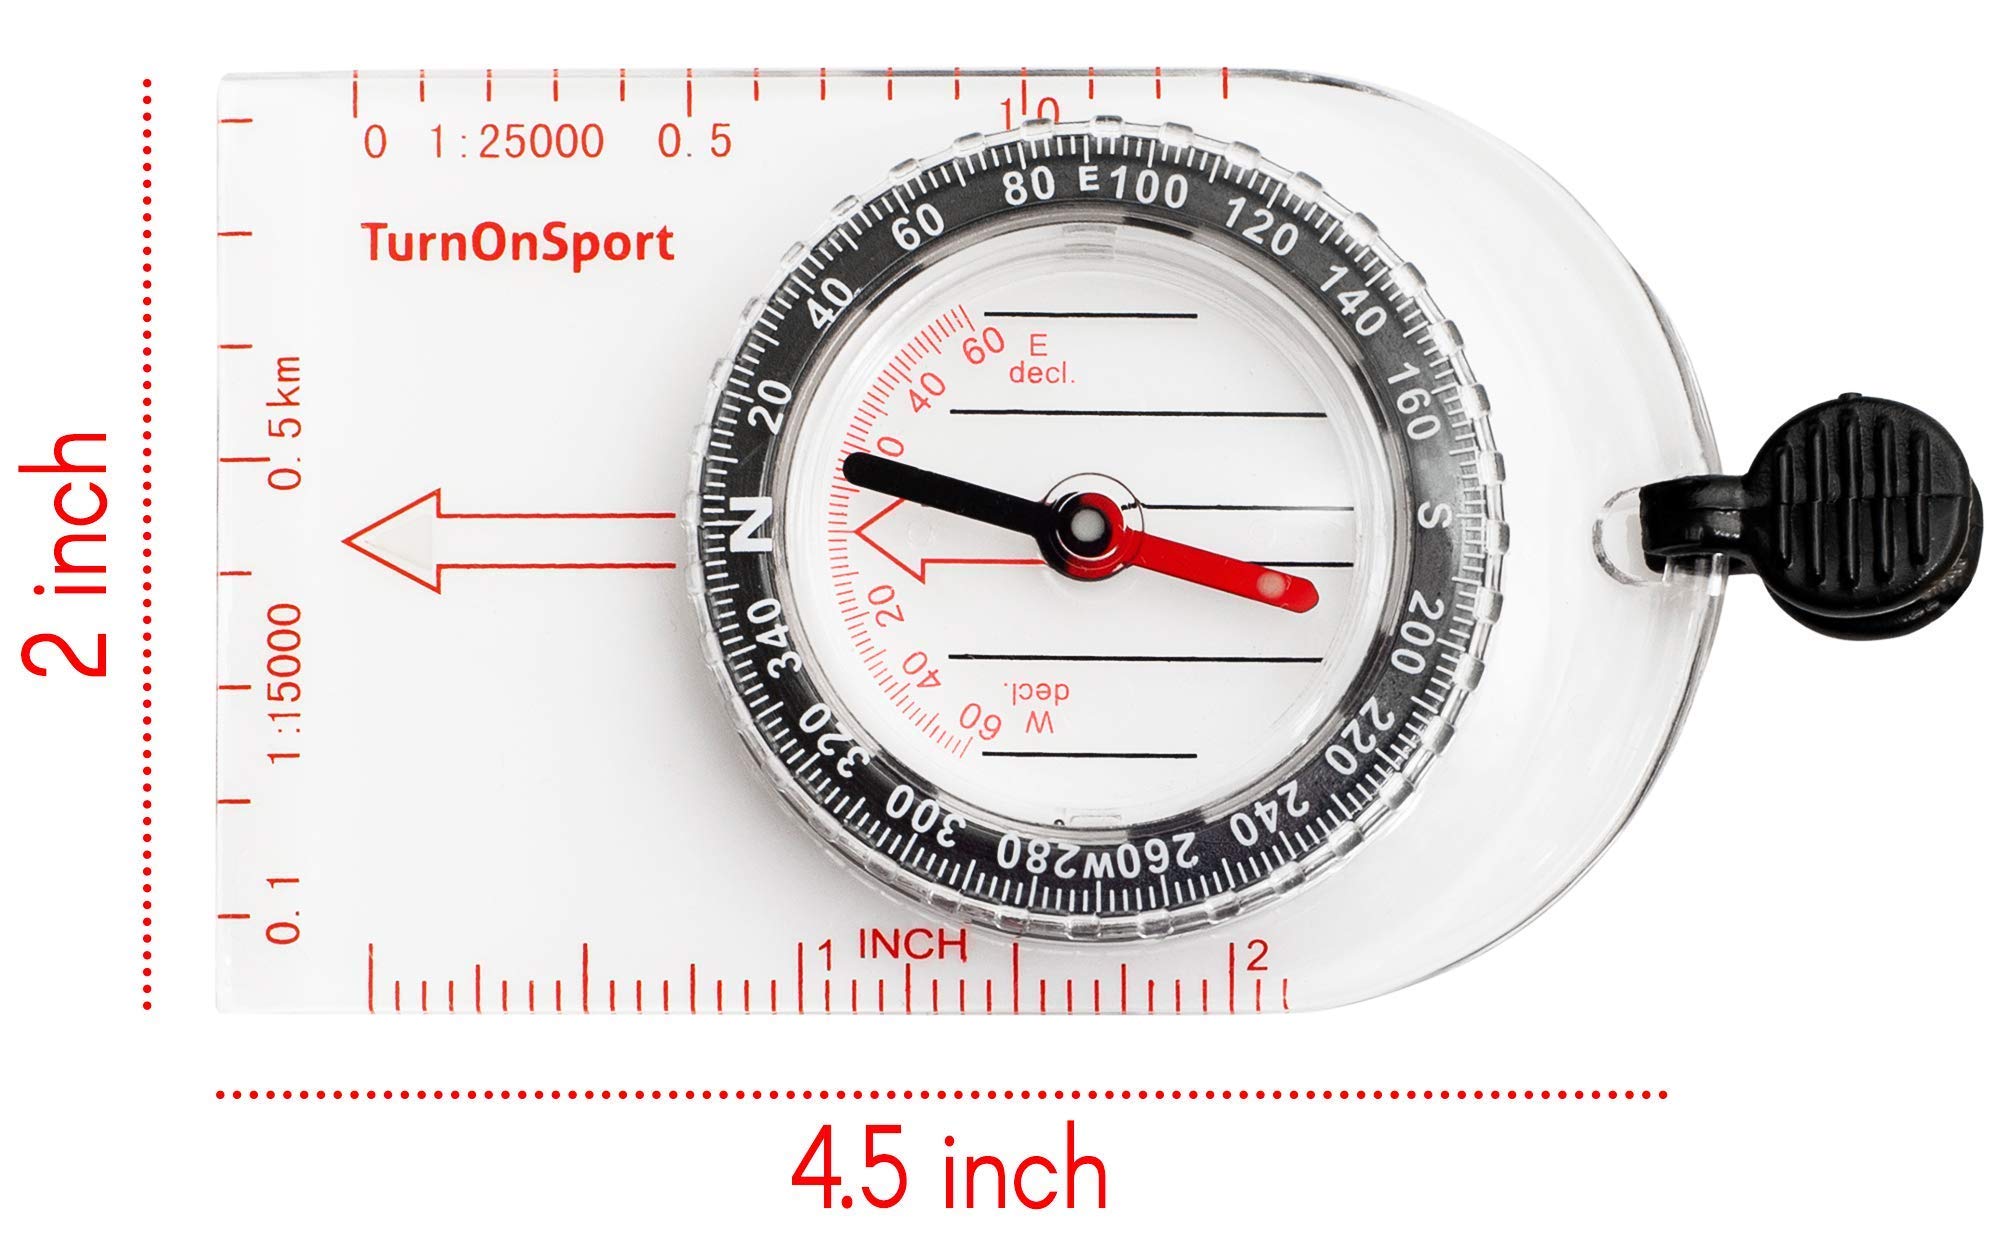 Boy Scout Hiking Compass TurnOnSport | Orienteering Compass for Kids Map Navigation - Small Survival Compass - Waterproof & Lightweight Small Survival Compass - Mini Camping Compass - Kids Camping Kit